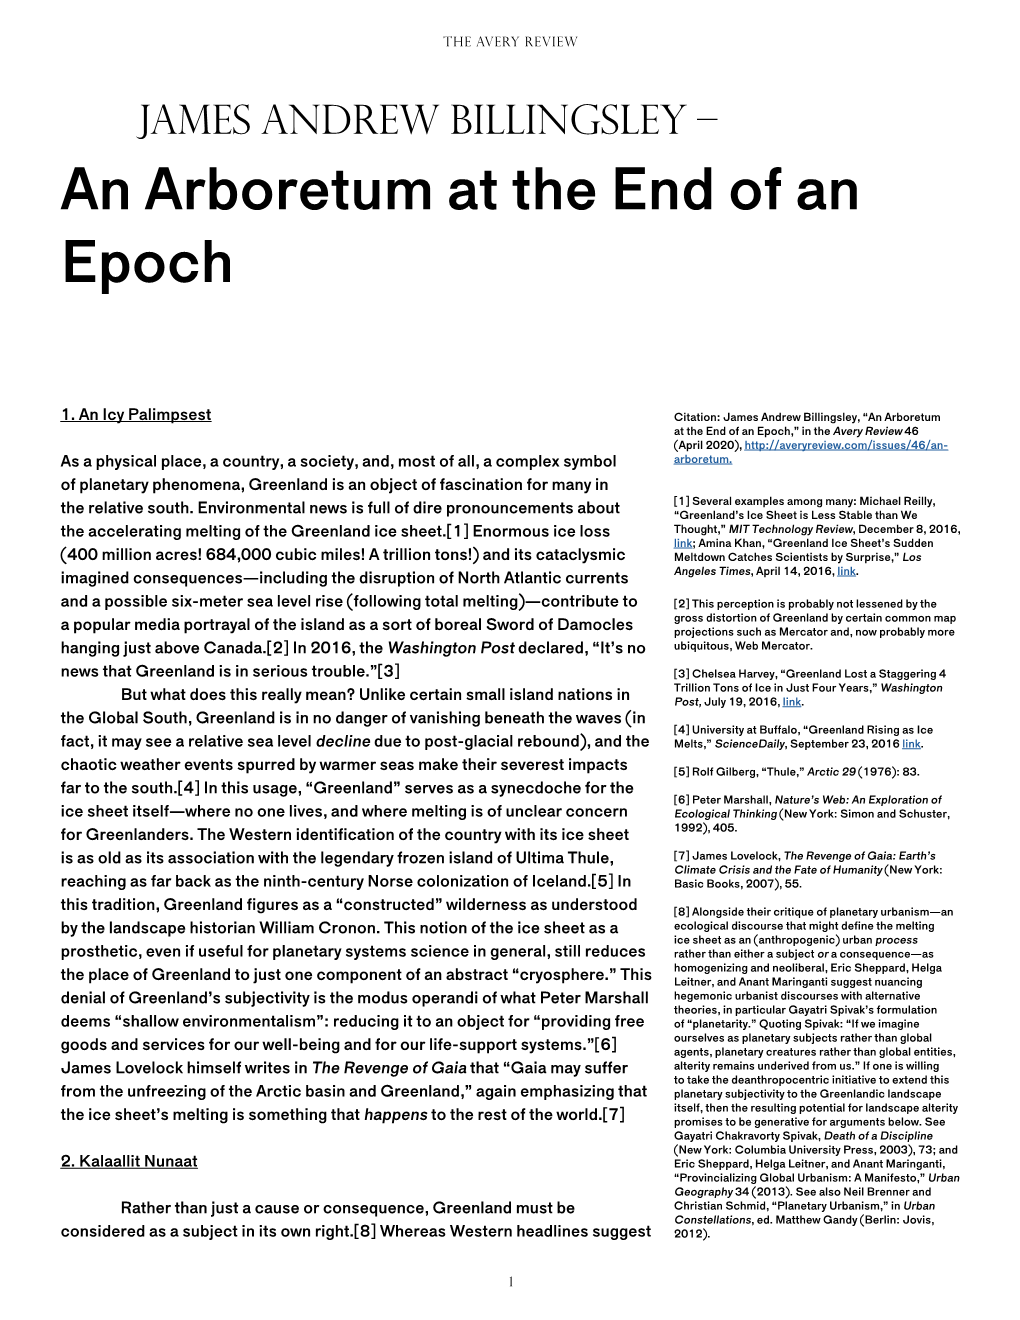 James Andrew Billingsley – an Arboretum at the End of an Epoch